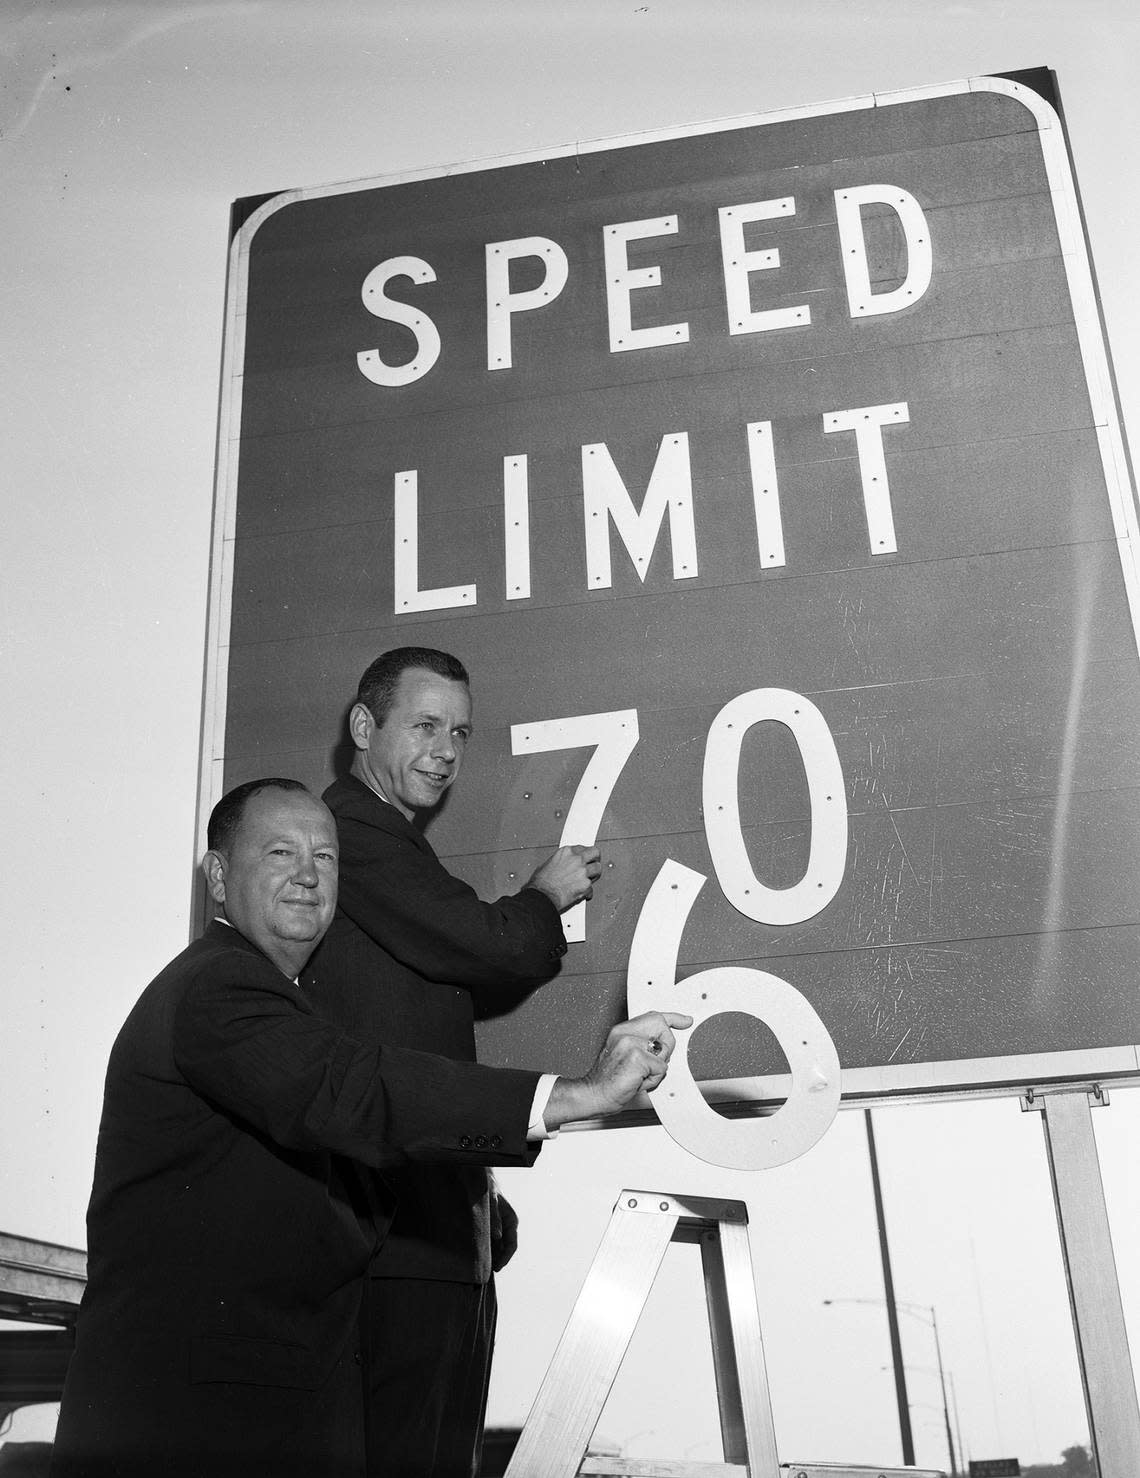 Aug. 28, 1961: Doyle Willis and Don Gladden pose as they appear to put up a 70 mph speed limit sign on the Dallas-Fort Worth Turnpike.